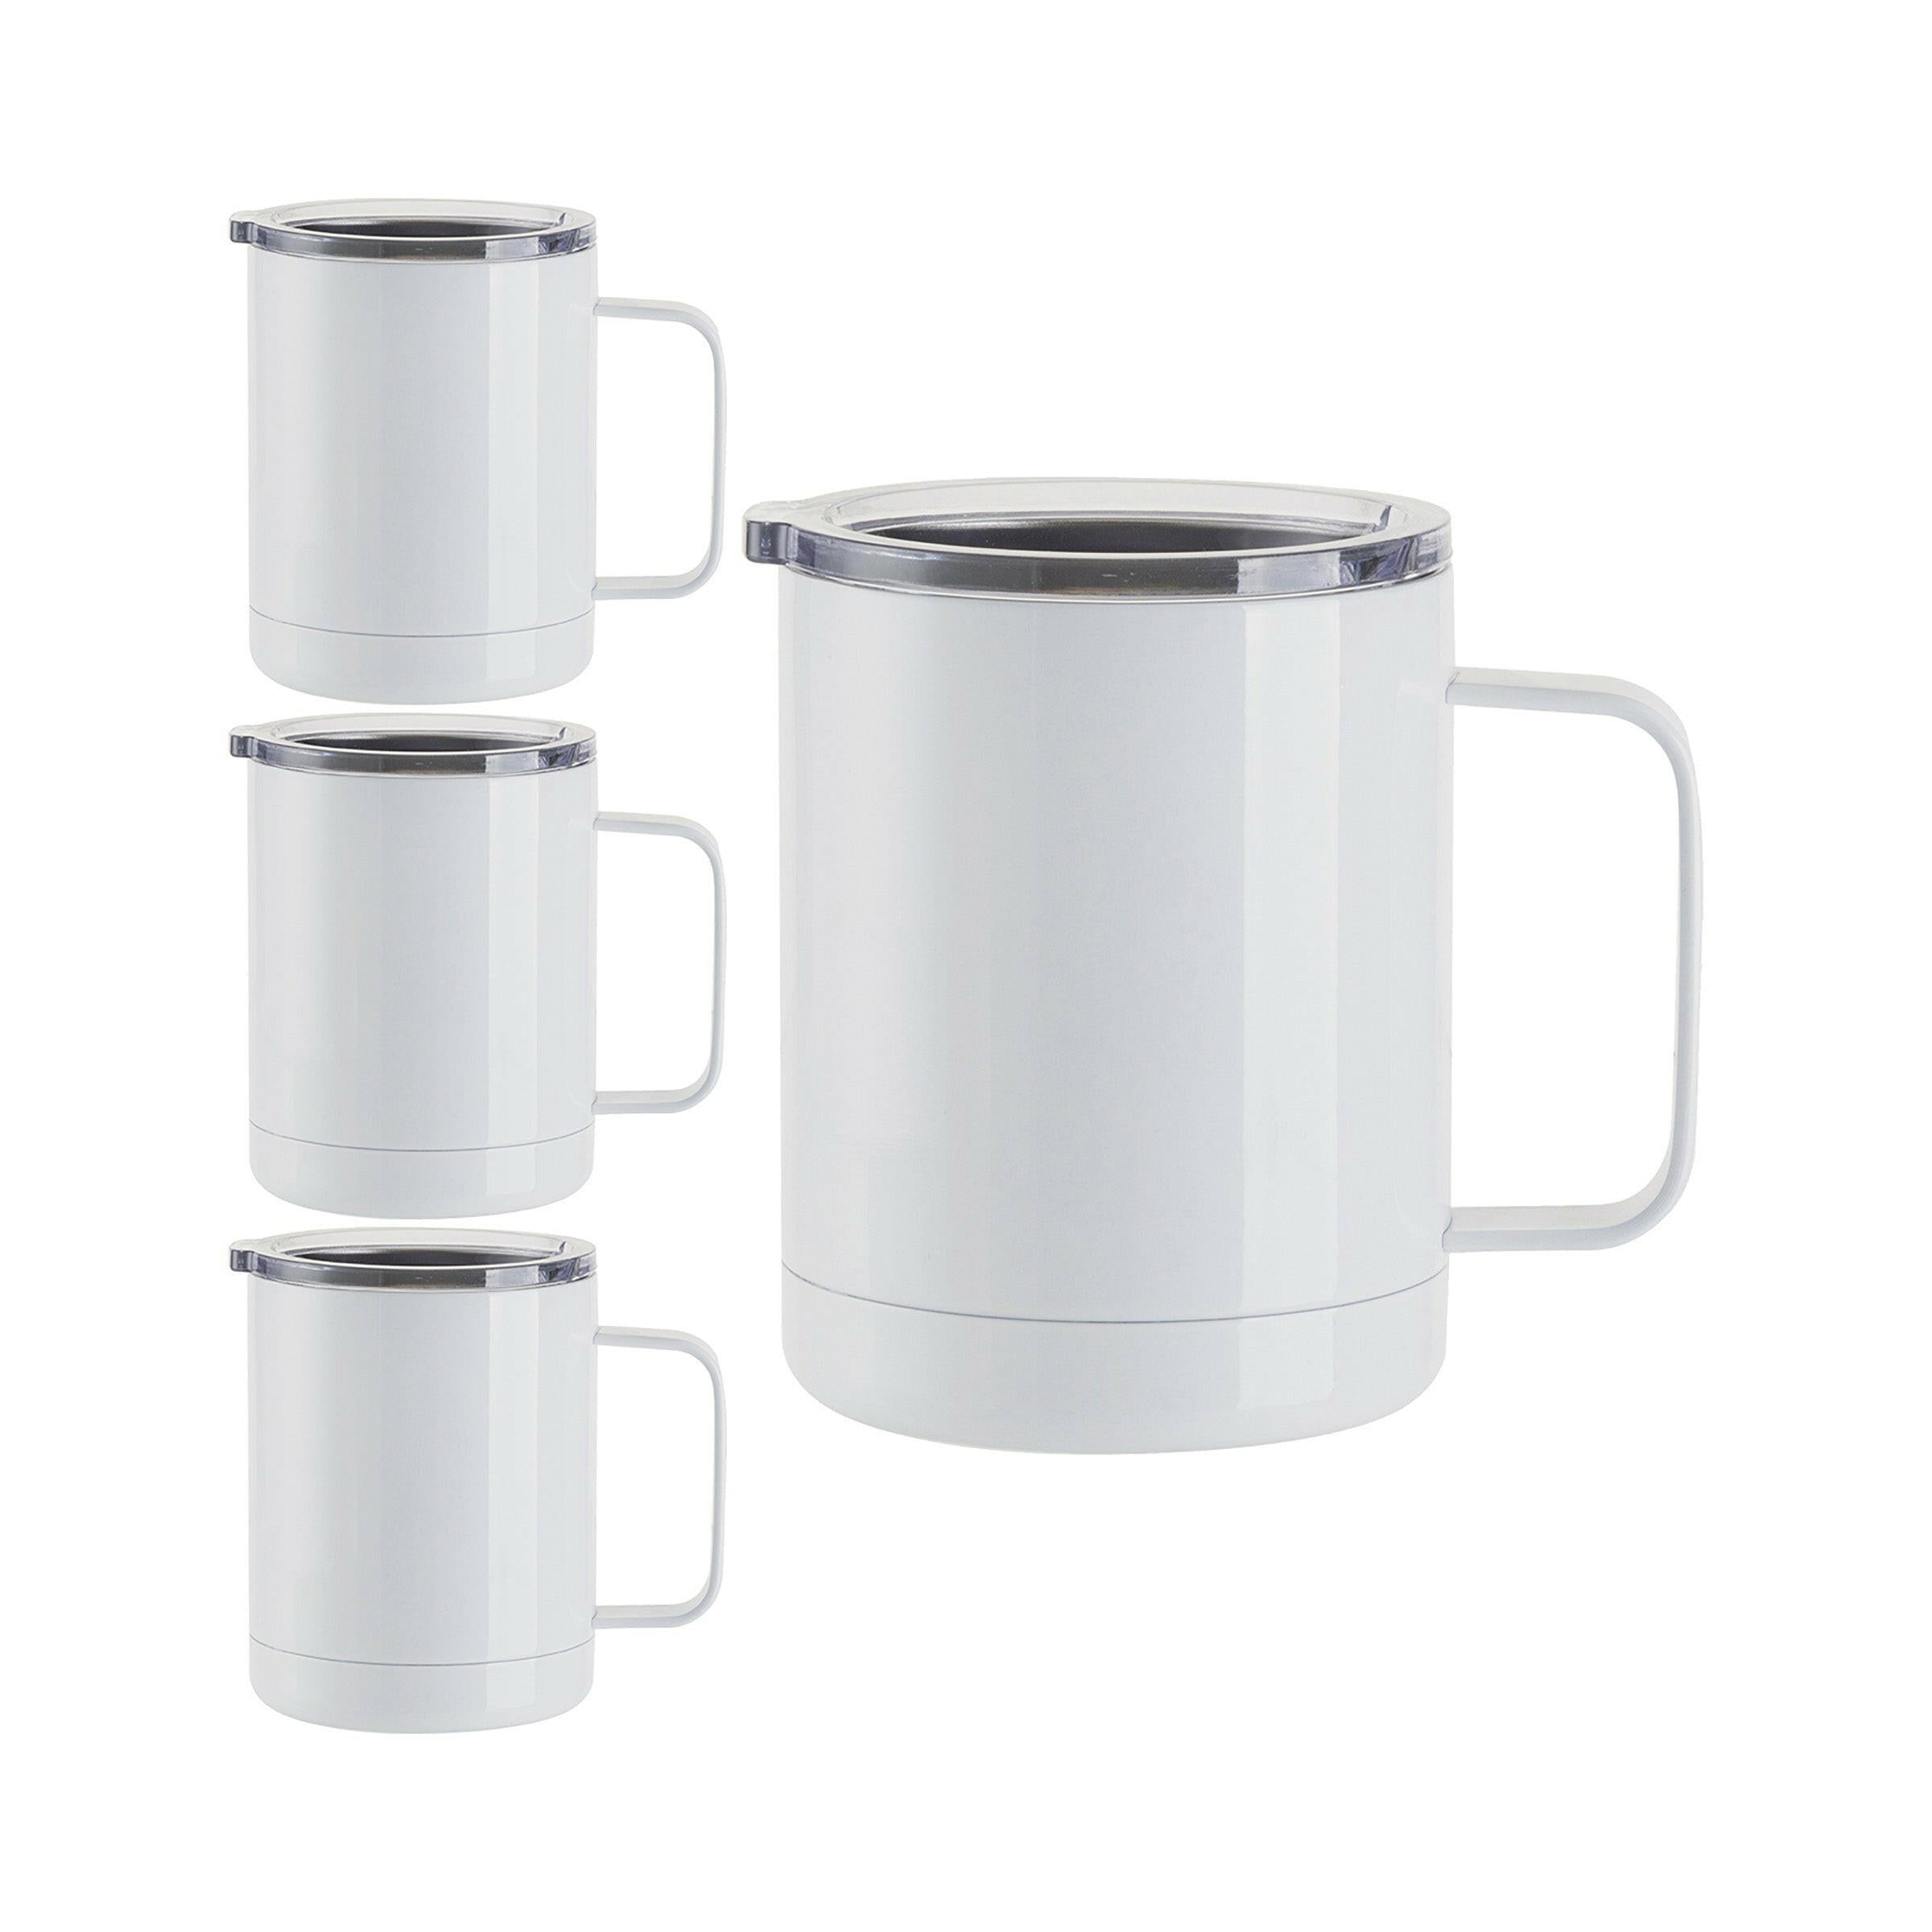 12oz Stainless Steel Sublimation Lidded Mugs - 4 Pack.